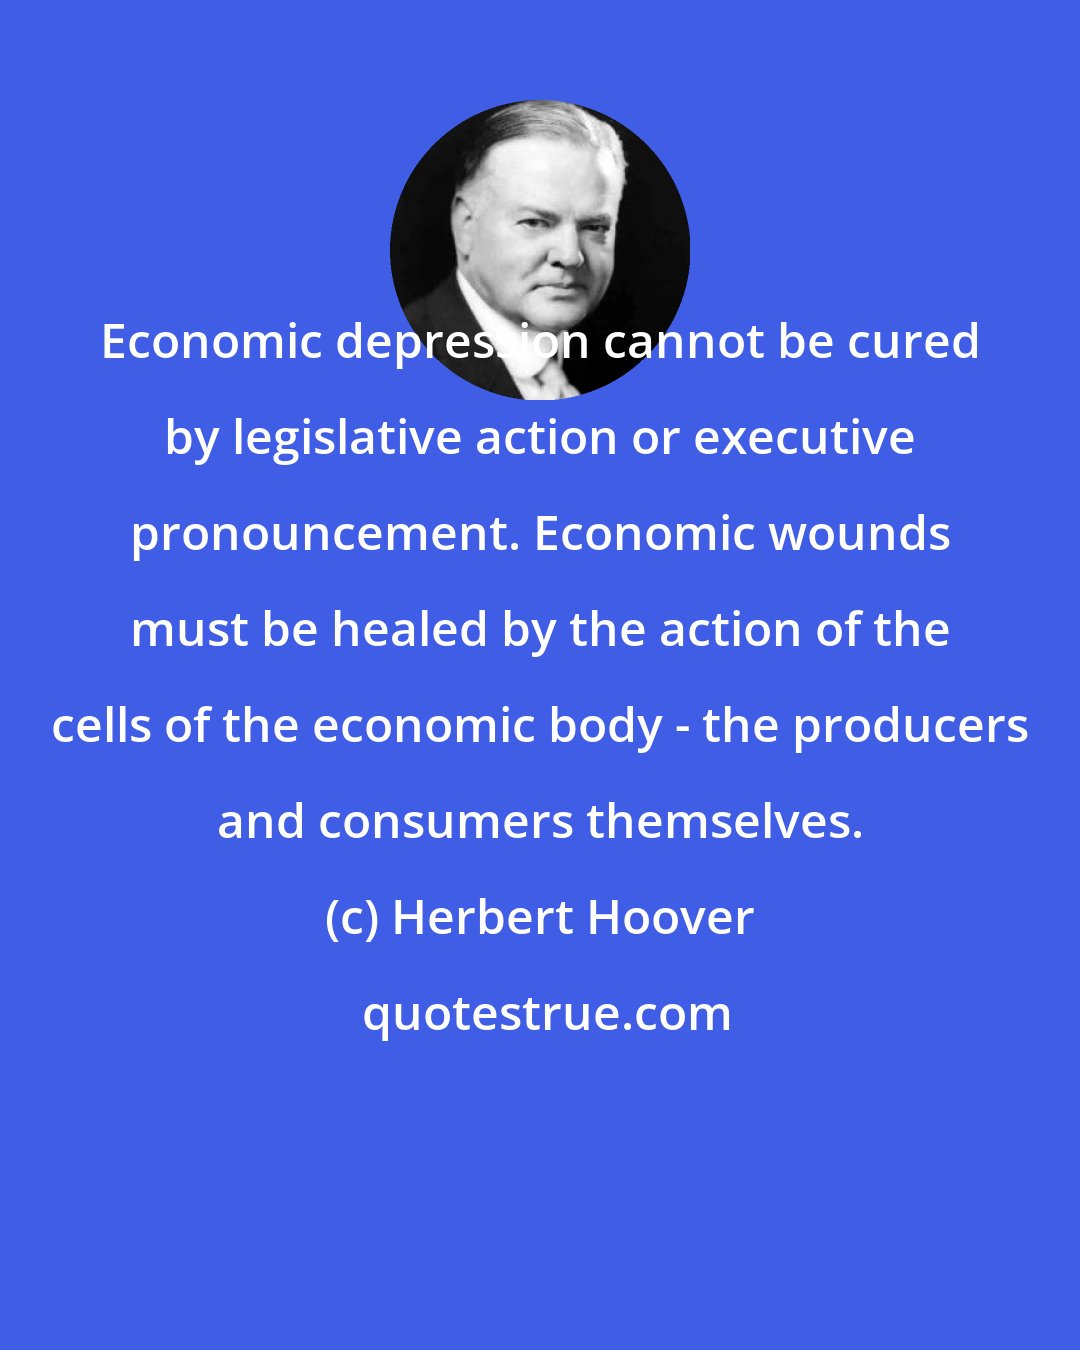 Herbert Hoover: Economic depression cannot be cured by legislative action or executive pronouncement. Economic wounds must be healed by the action of the cells of the economic body - the producers and consumers themselves.